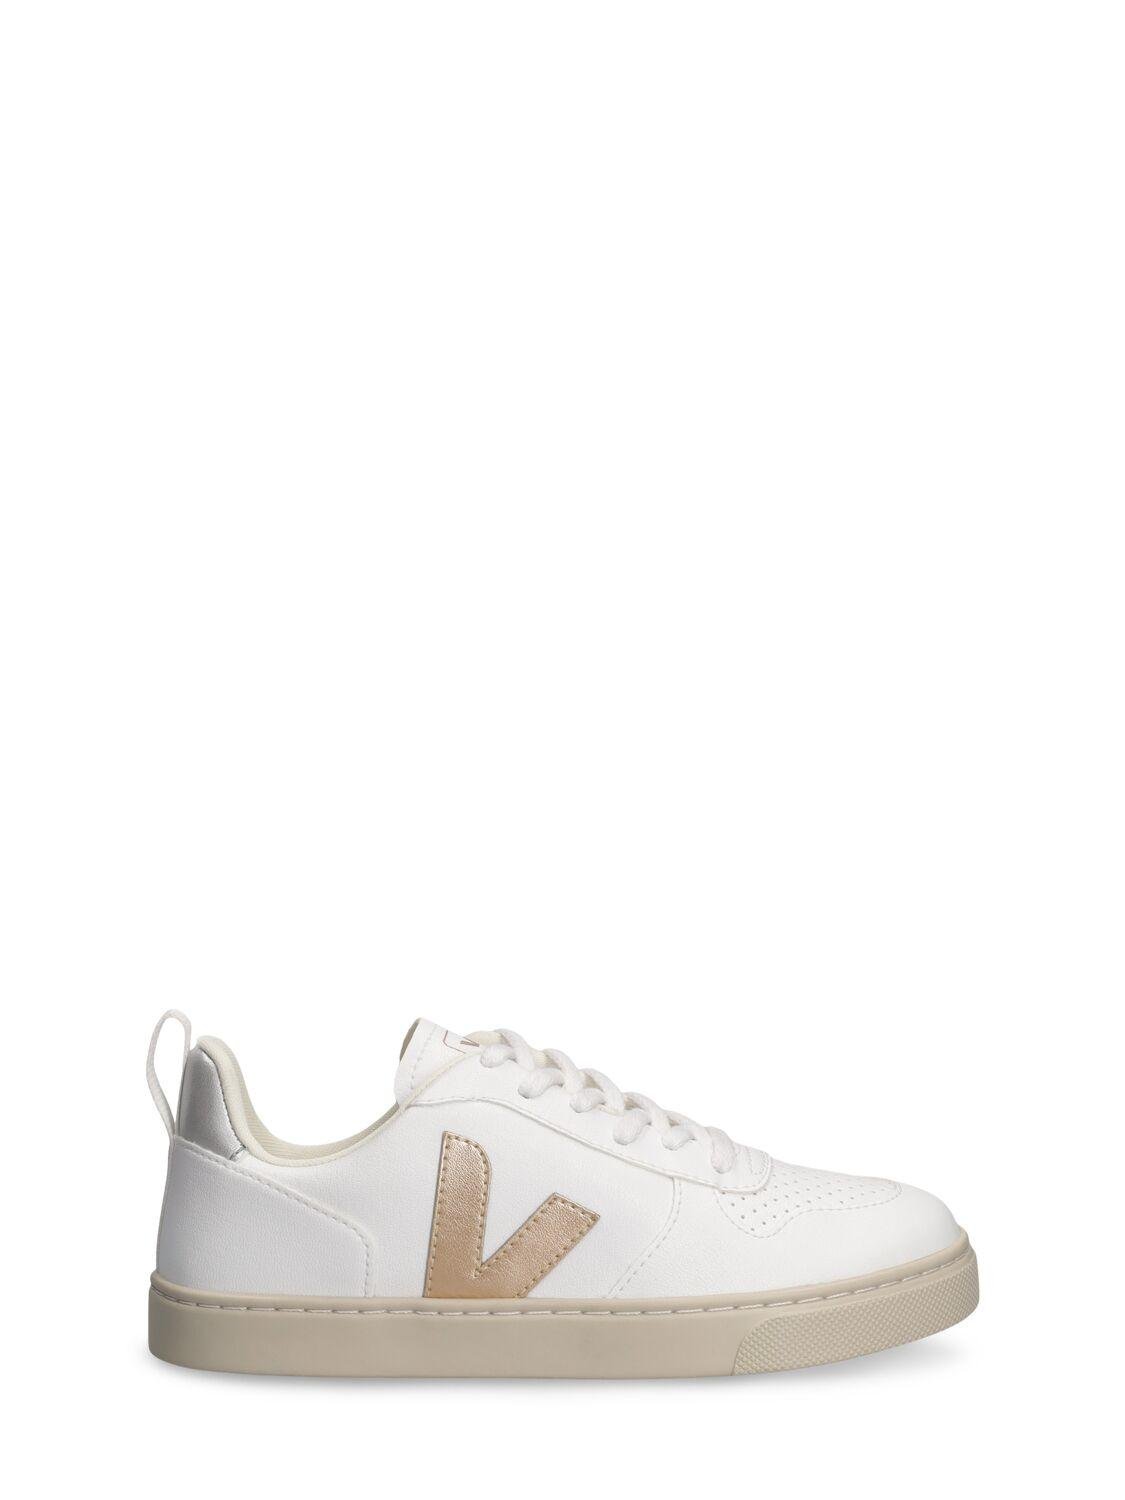 V10 Chrome-free Leather Sneakers by VEJA